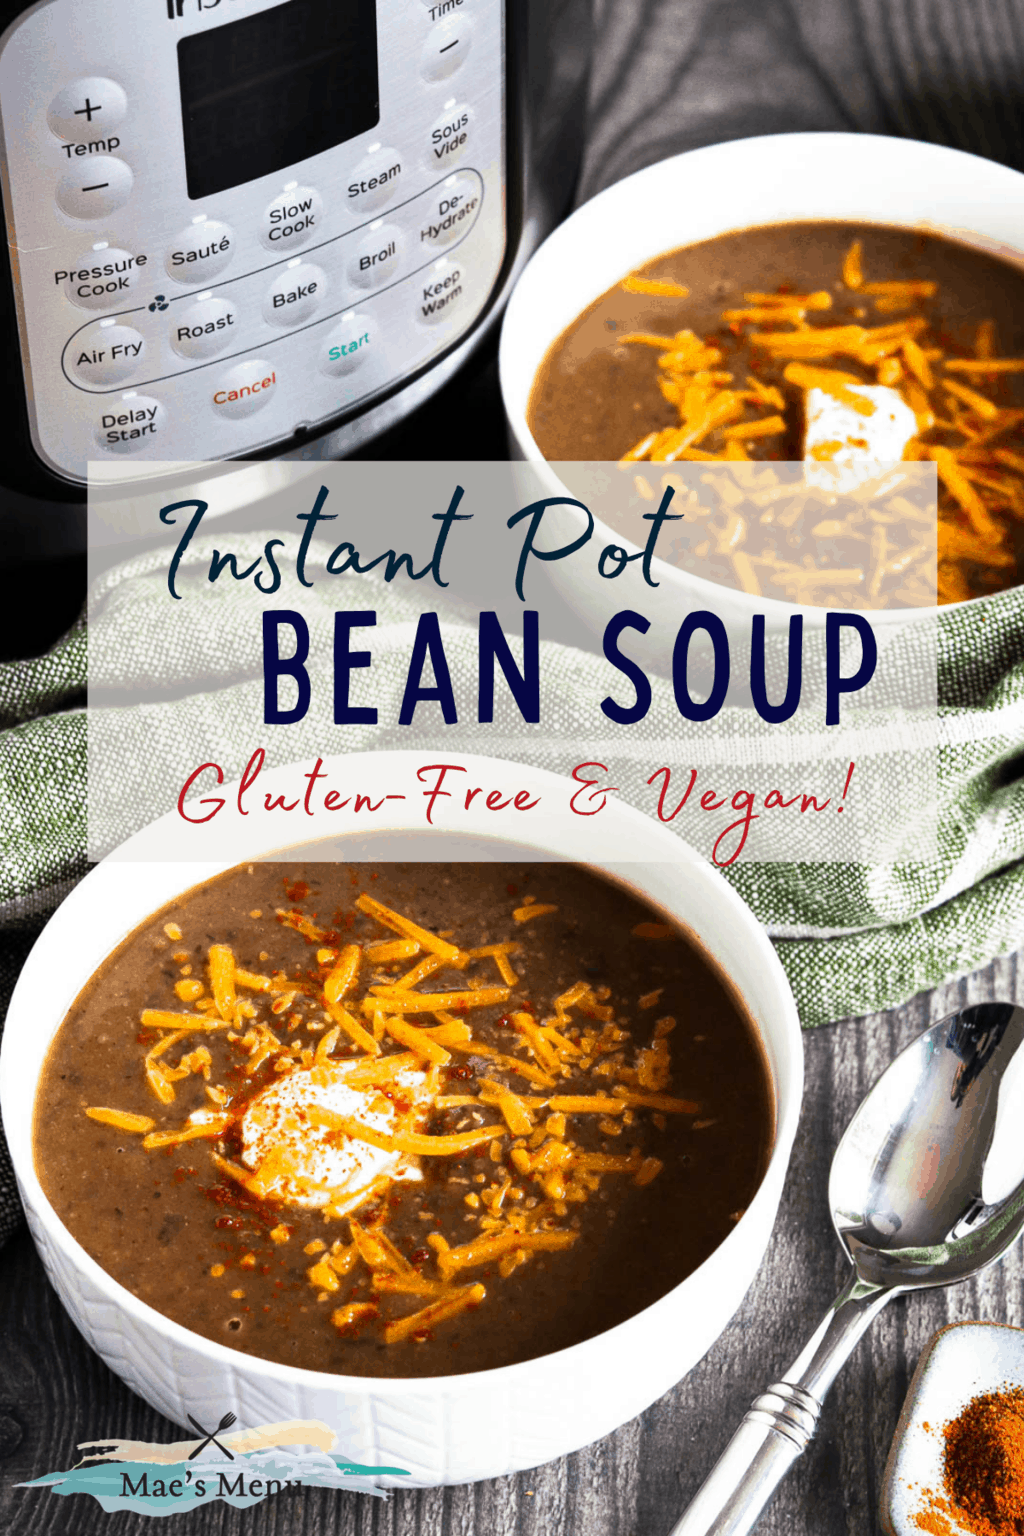 A pinterest pin for instant pot bean soup with a photo of two bowls of soup in front of an Instant Pot